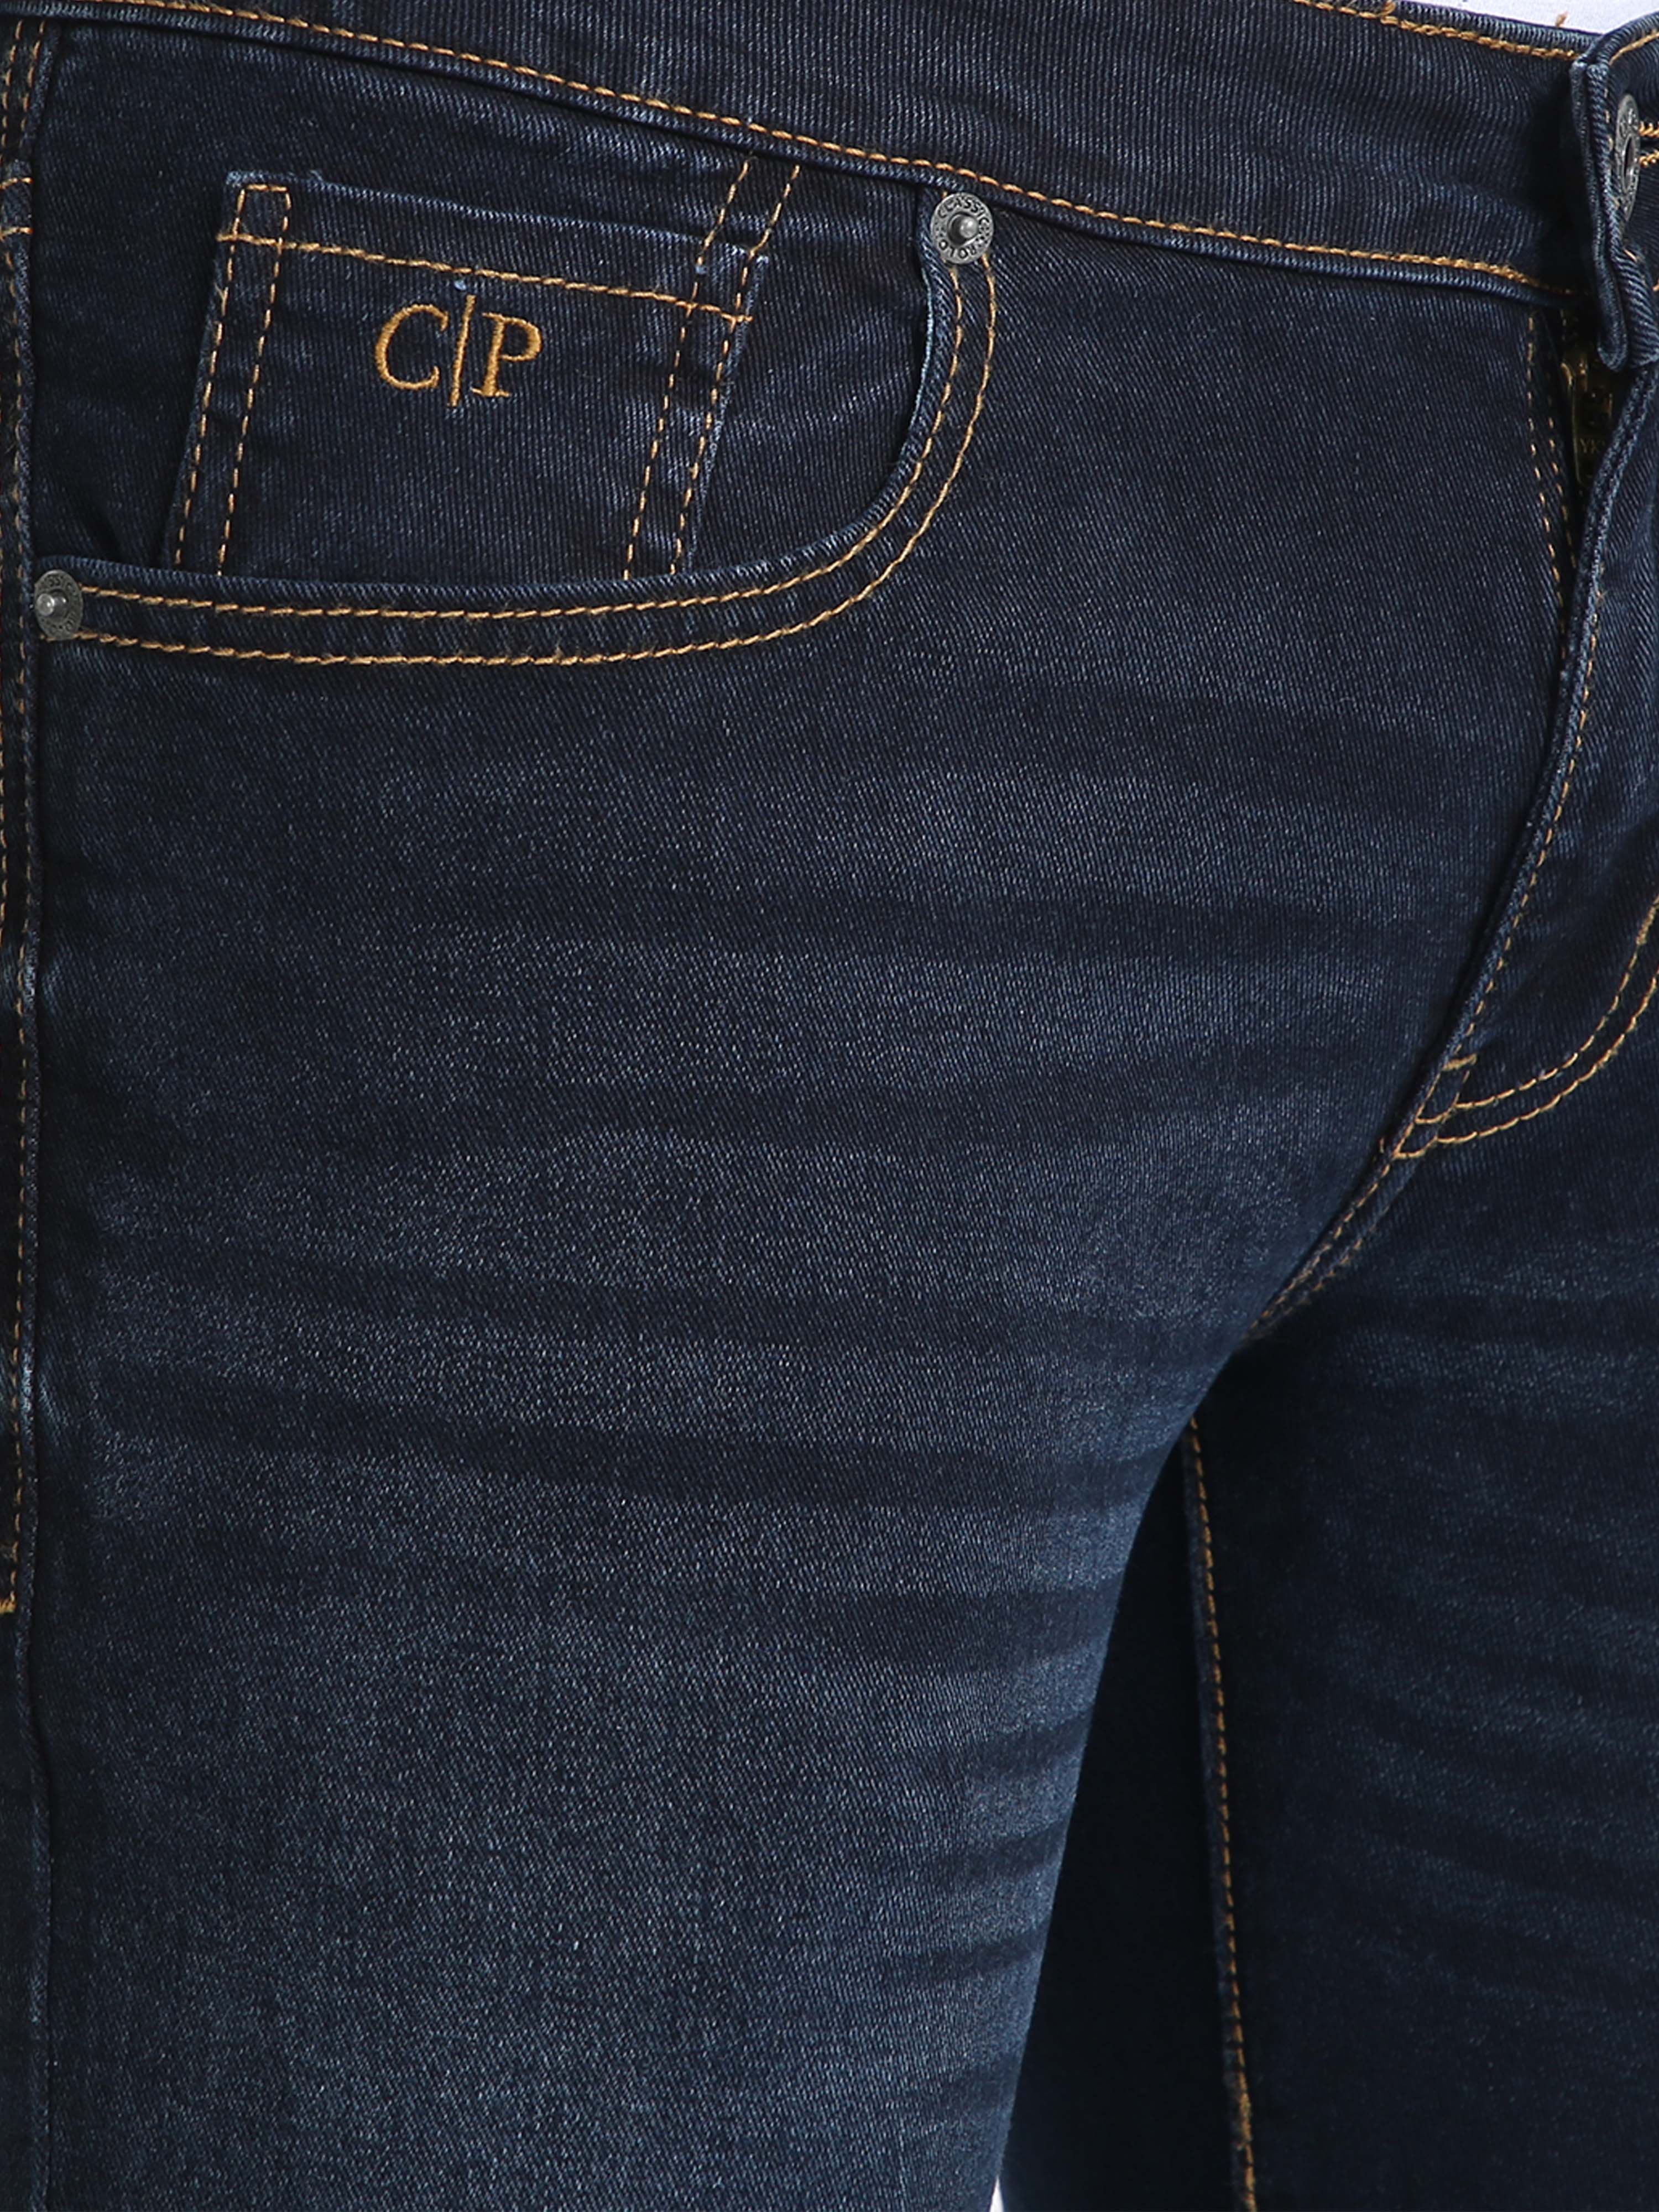 Classic Polo Men's Slim Fit Cotton Denim | CPDO2-23 DNVY-SF-LY